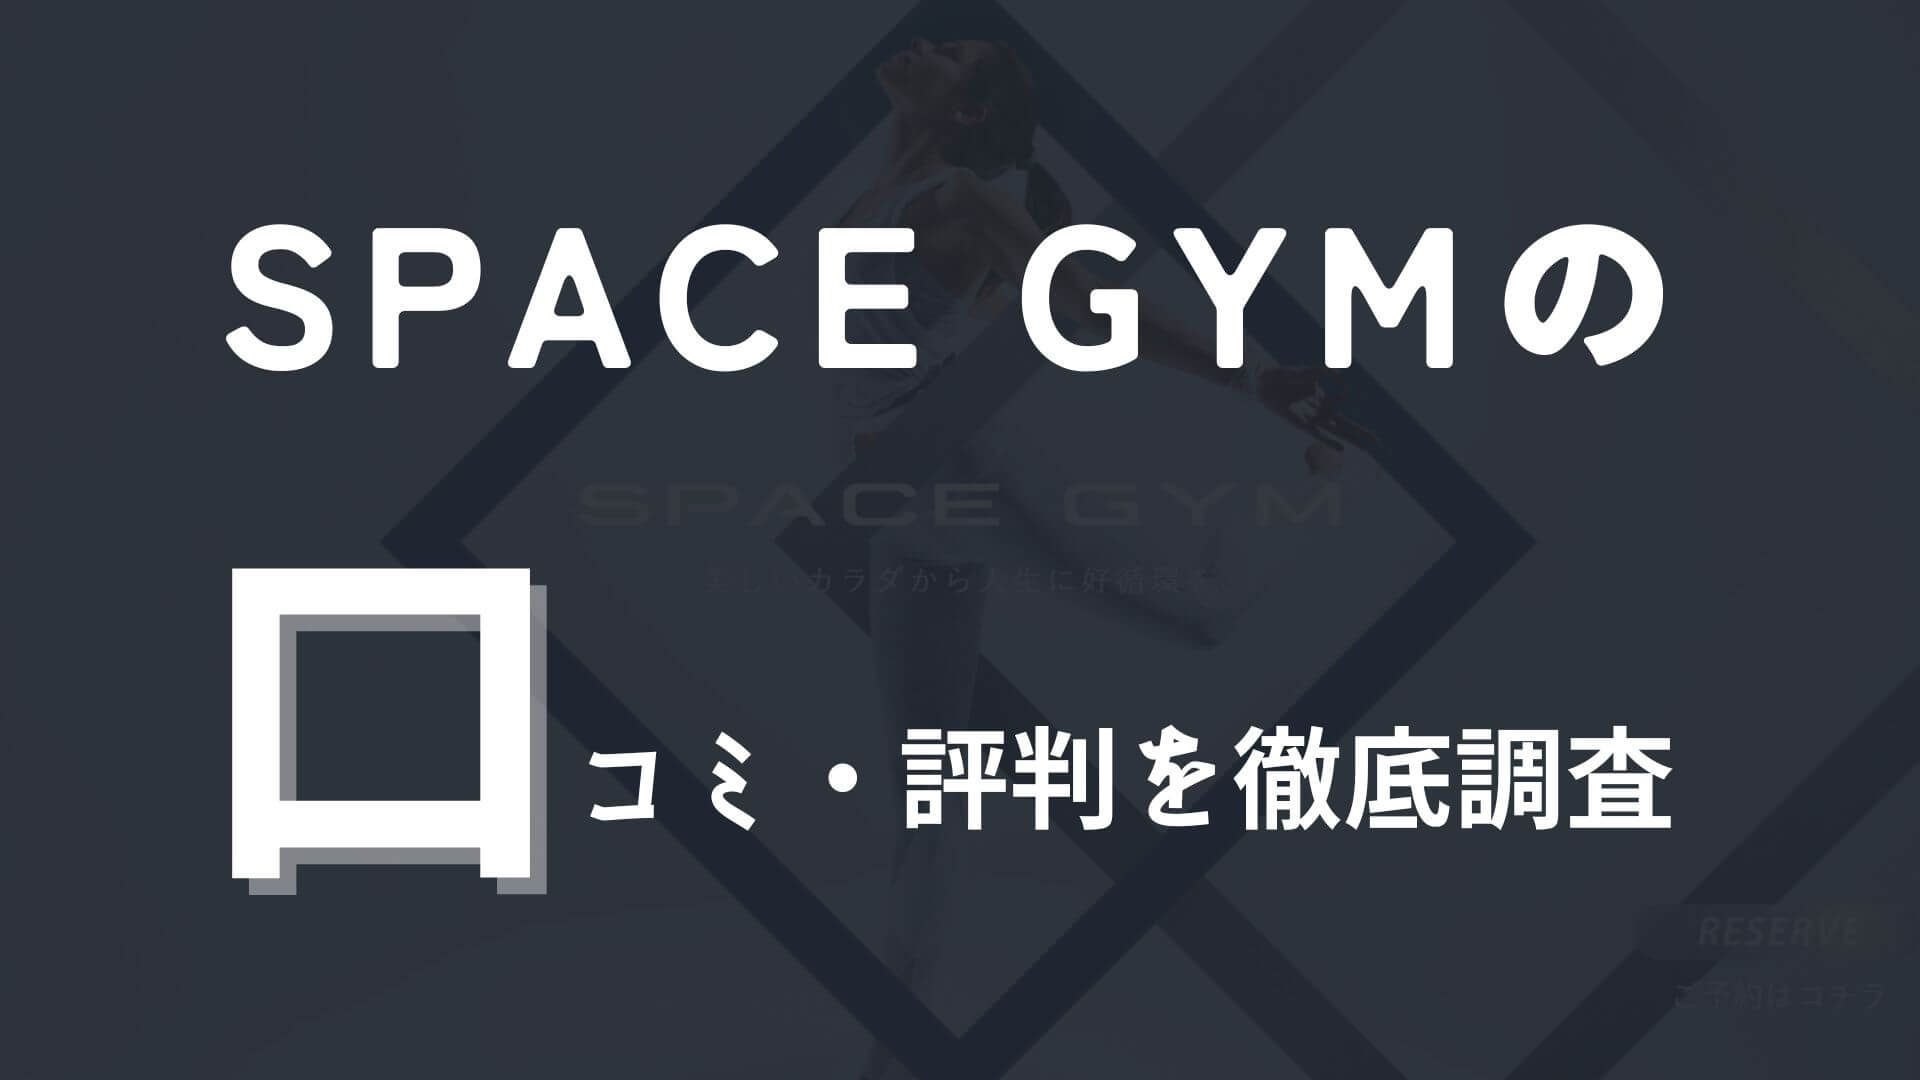 SPACE GYMの口コミや評判を徹底調査！